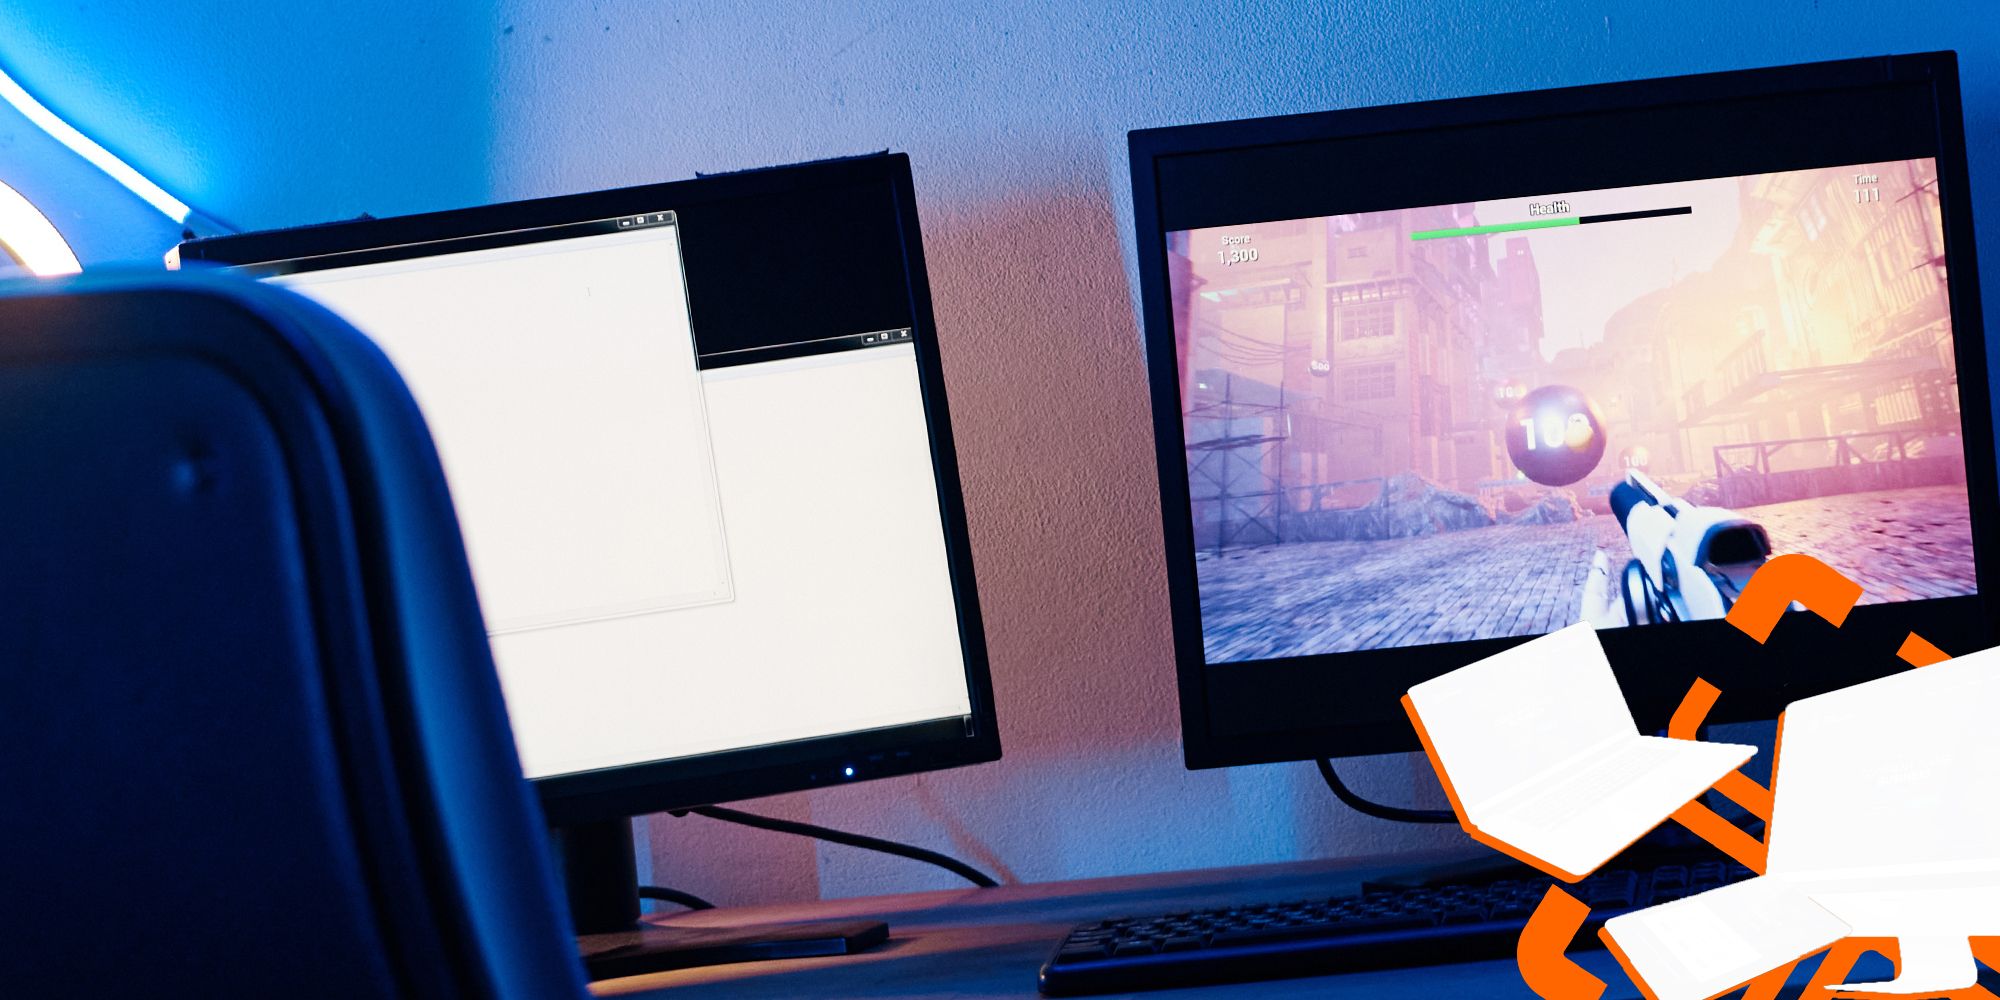 An image of two computer monitors side by side with a graphic overlay in the bottom corner.